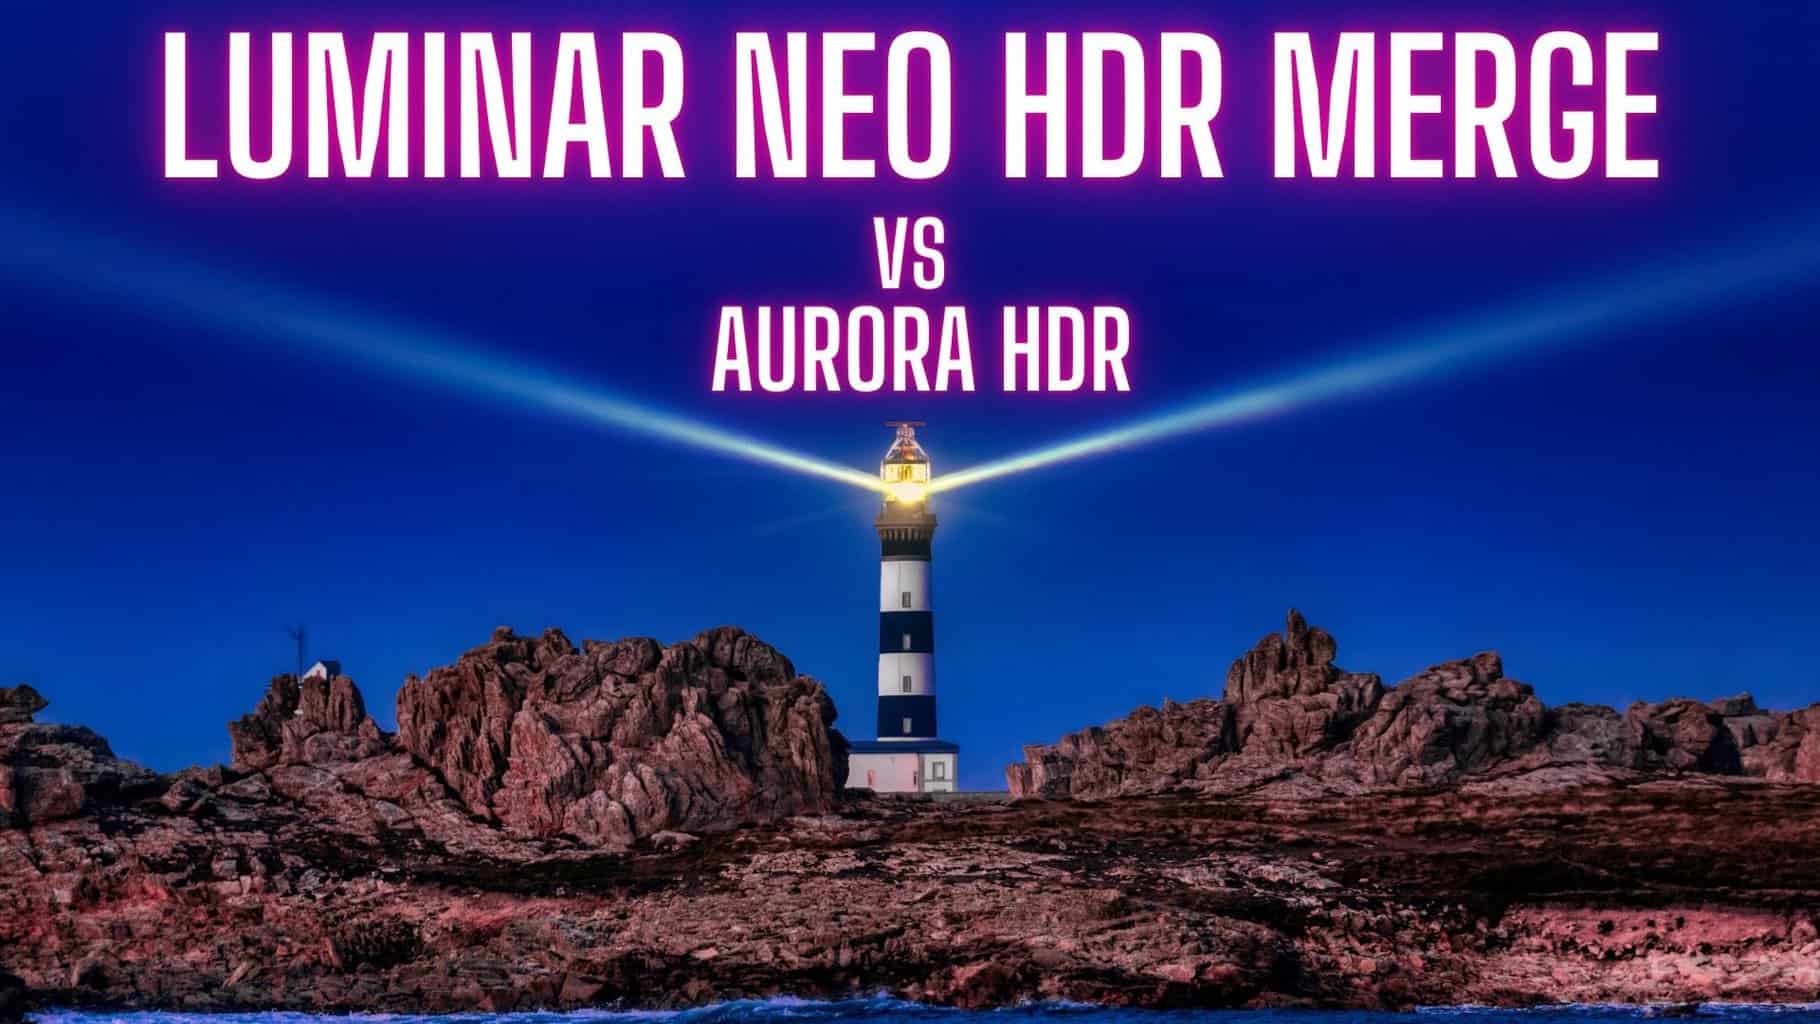 Luminar Neo HDR Merge Review and what’s it all about?